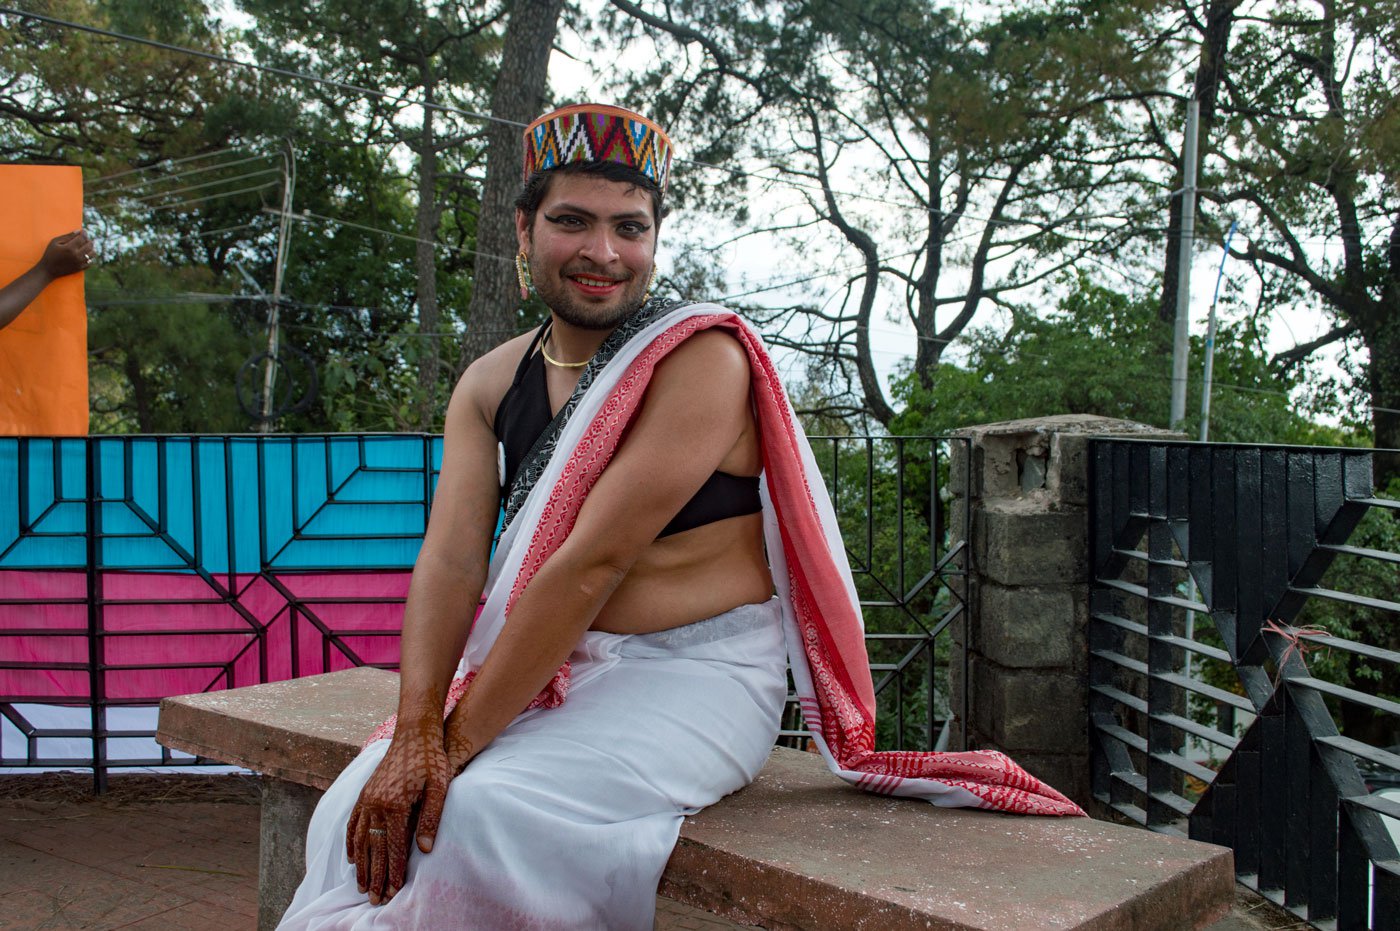 Don Hasar was the first person to have a Trans identity card in Kangra District in Himachal Pradesh. ' I had to go through so much to get it. But what about those who don’t know how to get their rights?' they ask